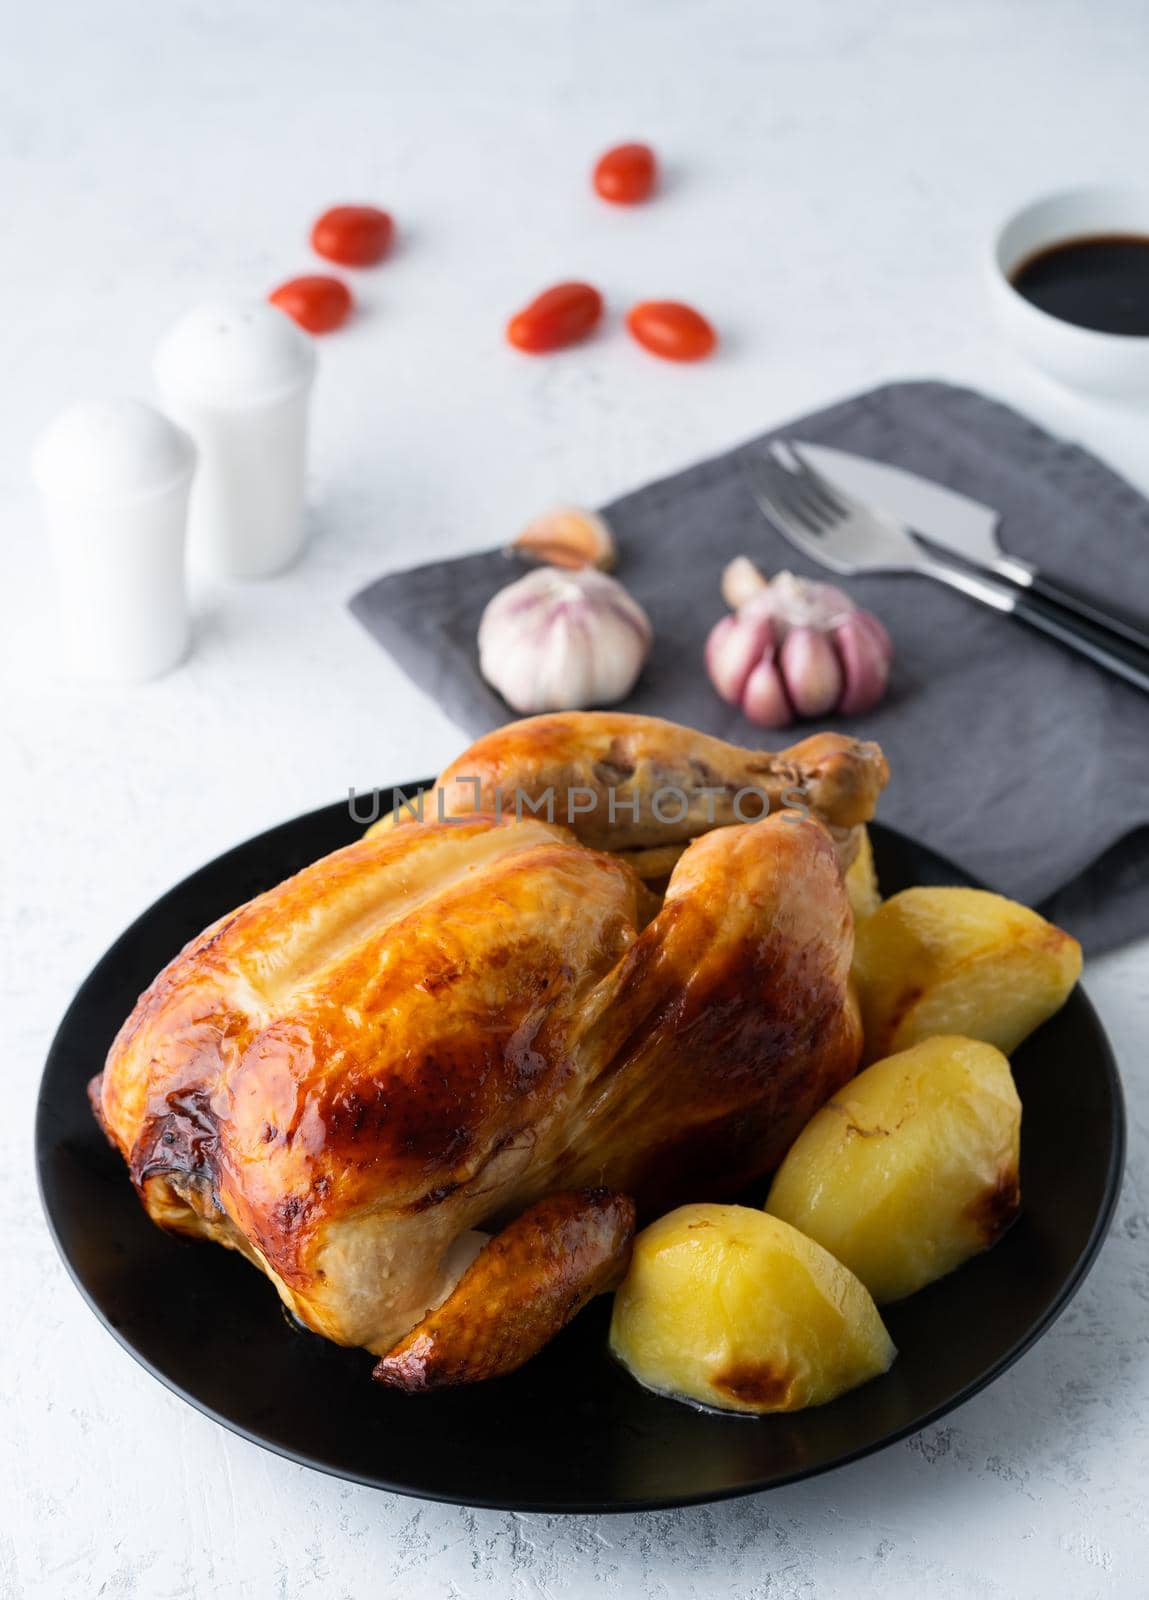 Grilled whole chicken in black plate on white table, baked meat with potatoes. Side view, vertical by NataBene